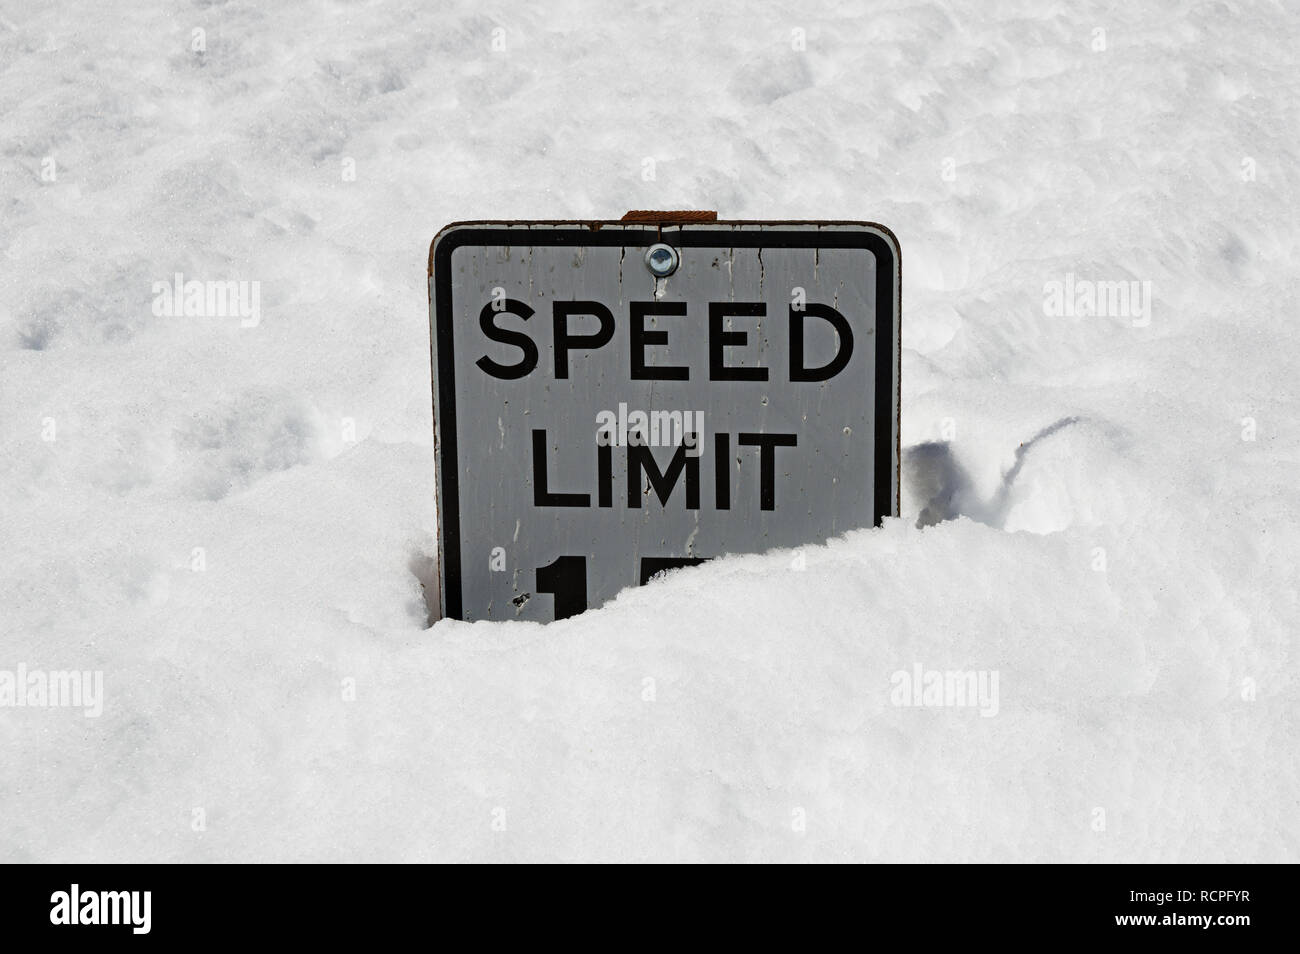 old speed limit 15 sign half buried in deep winter snow Stock Photo